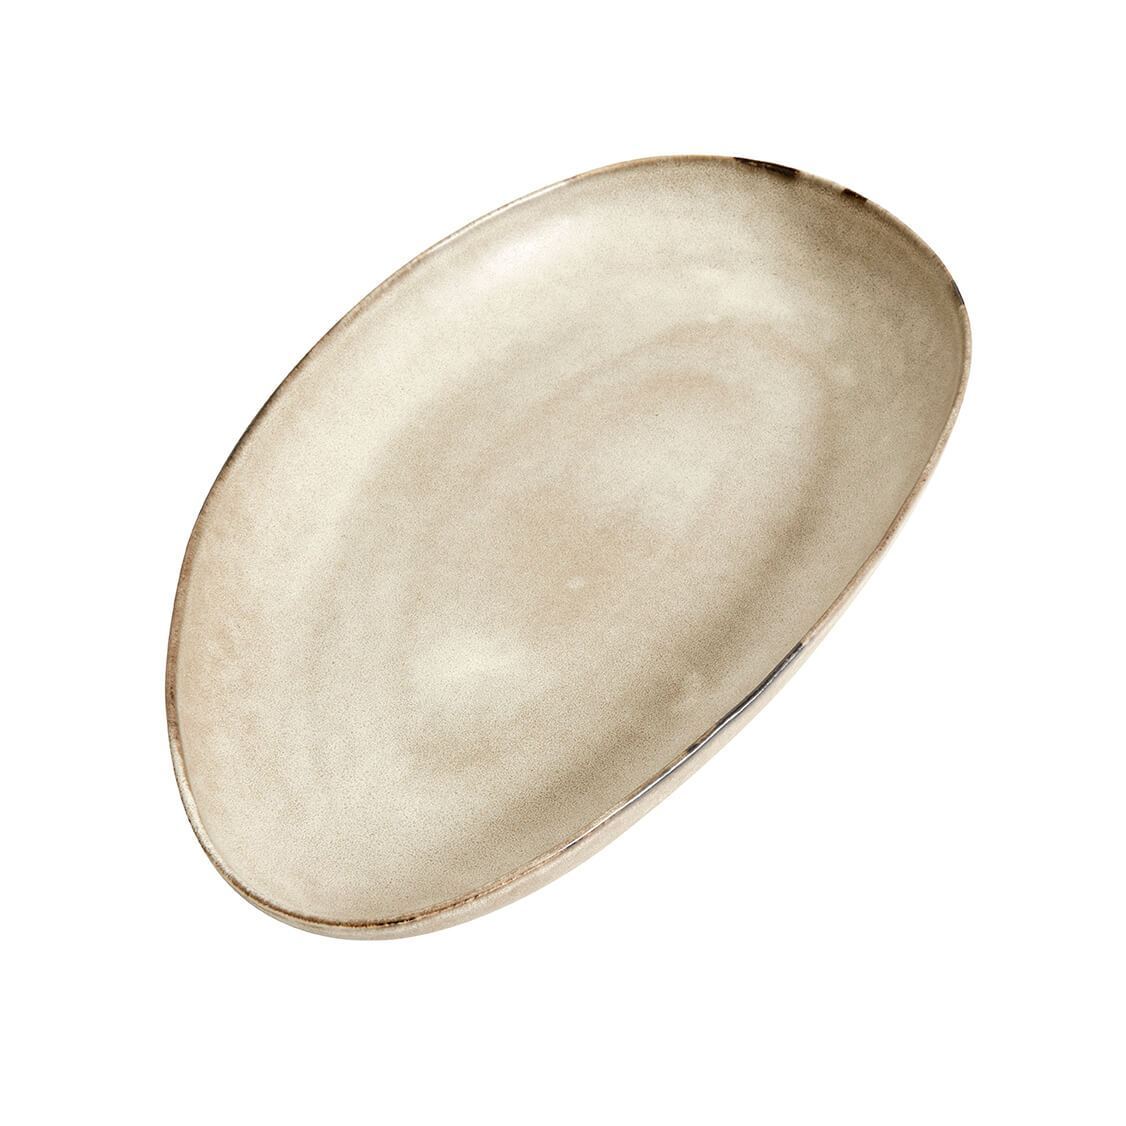 Muubs Mame Plave Oval Oyster, 43 cm